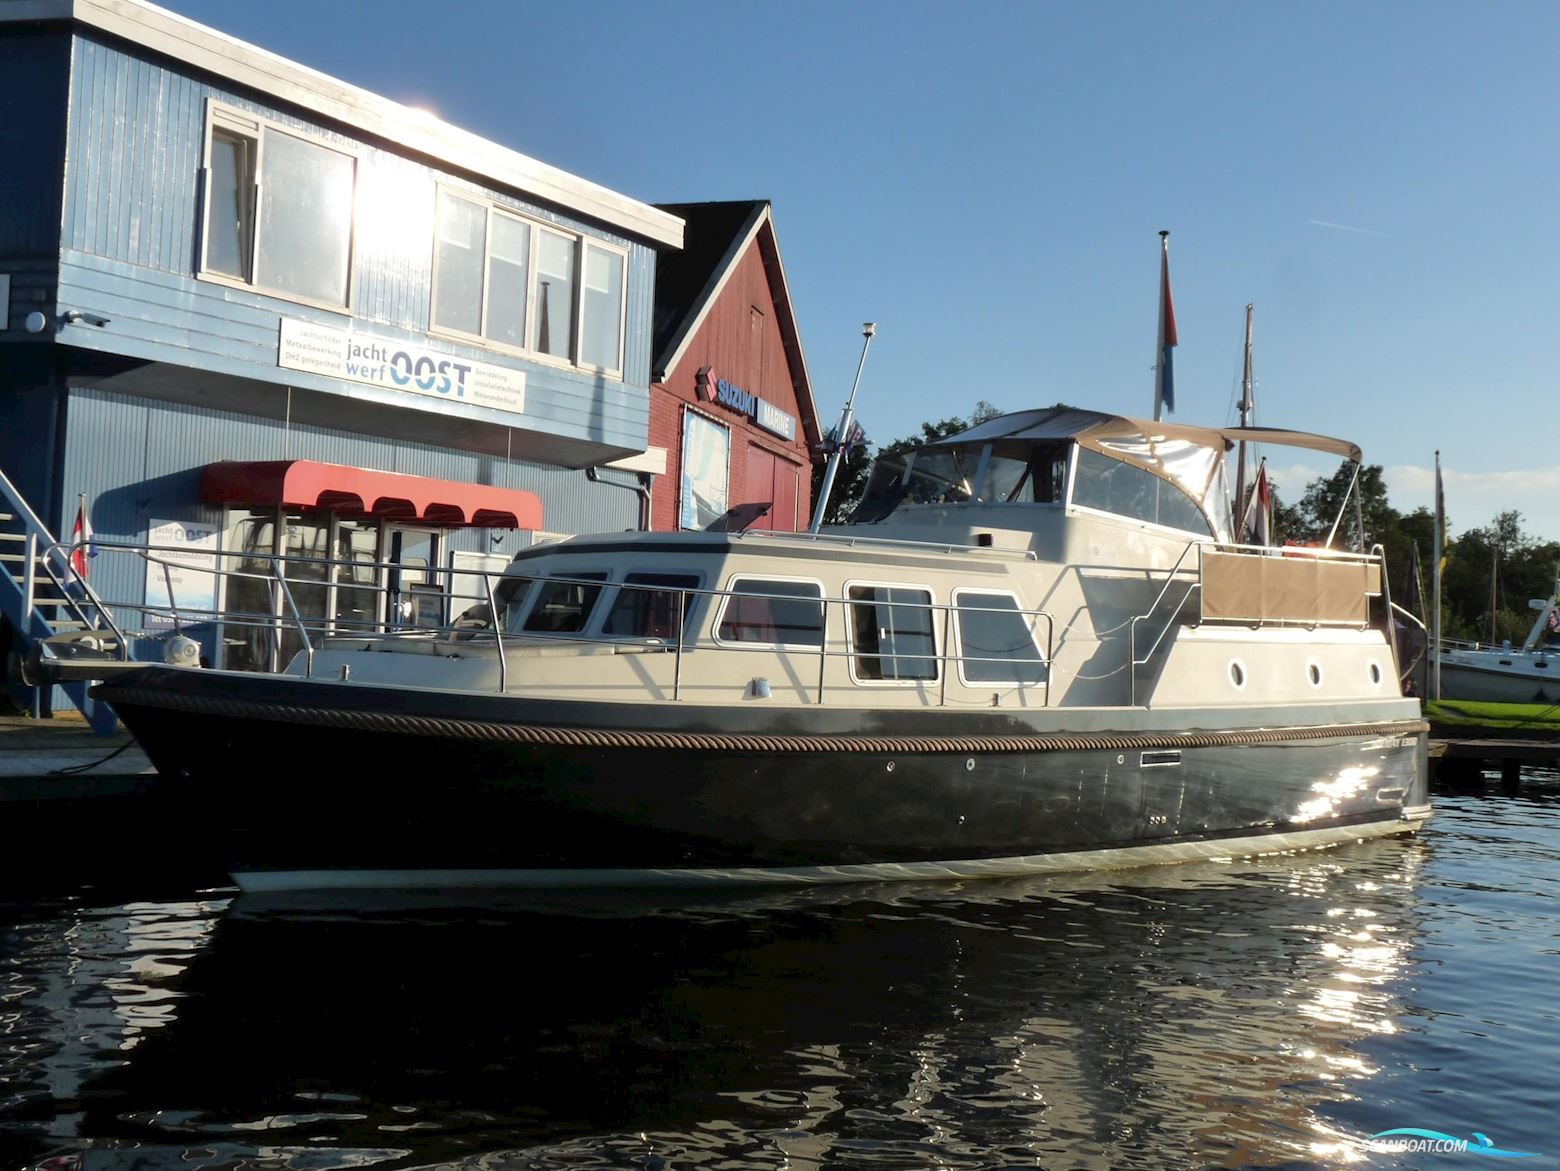 Holiday 1300 - Te Huur 2-10 Personen Motor boat 2016, with Craftsman engine, The Netherlands